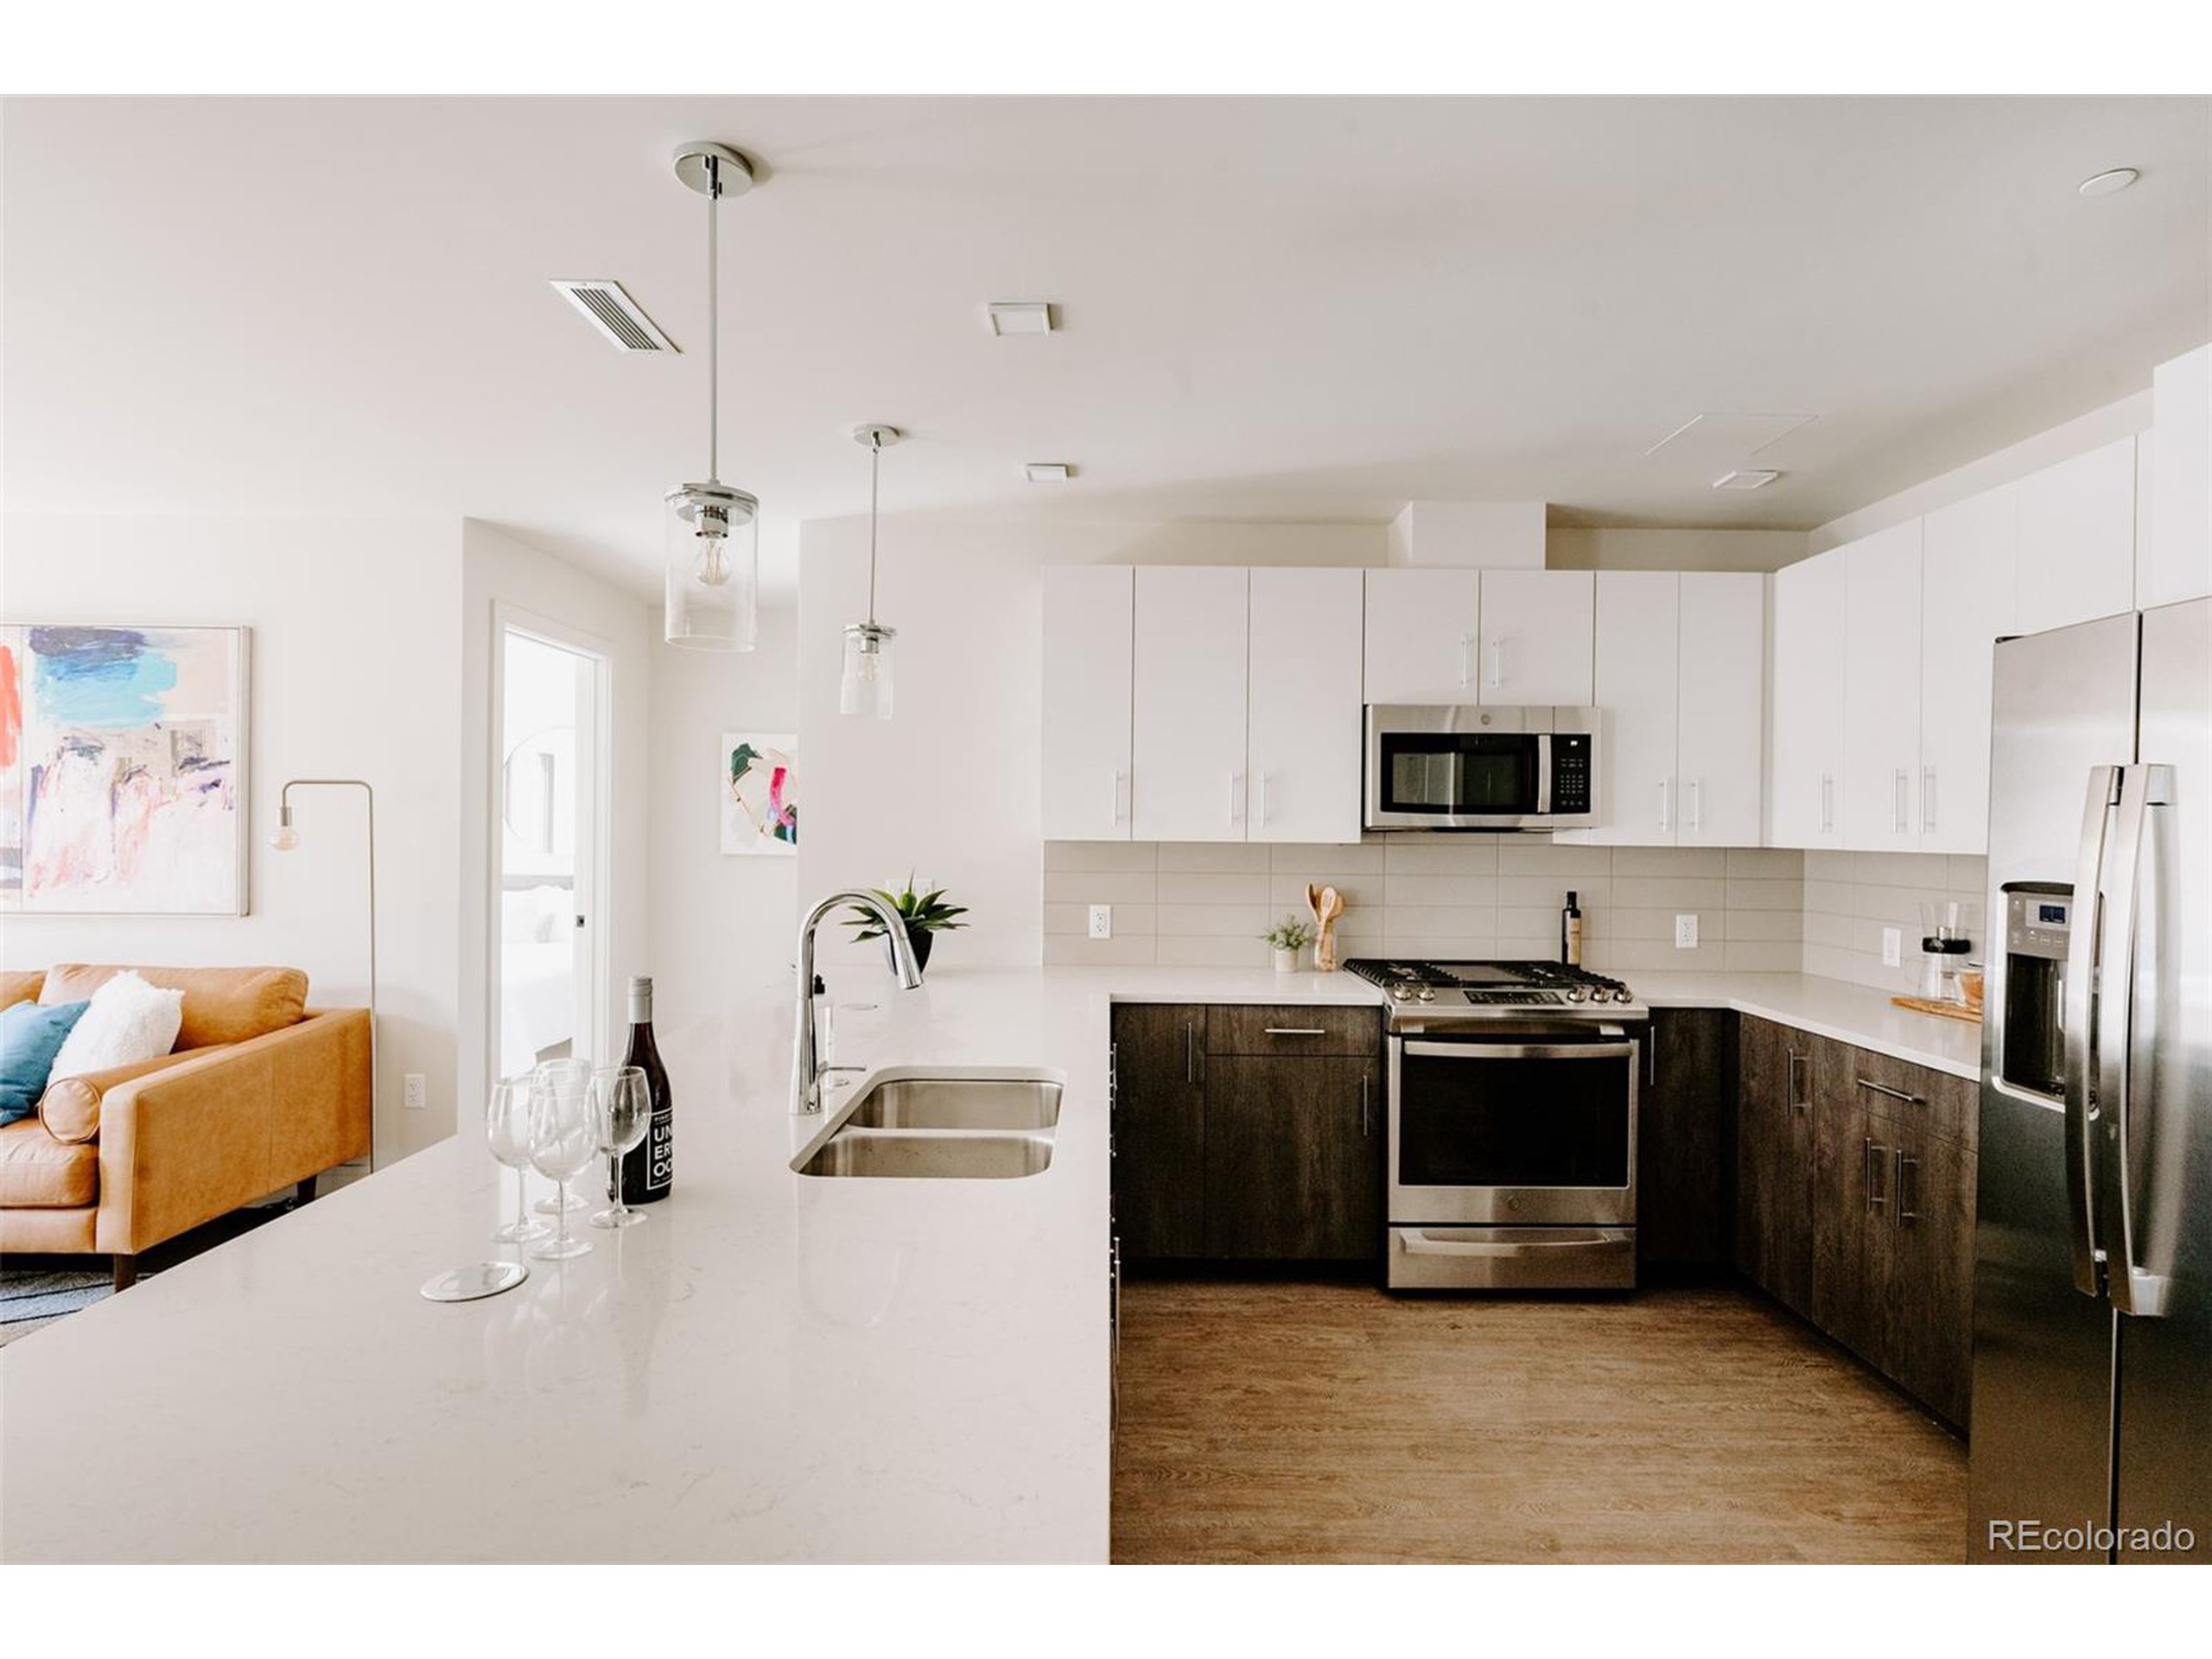 a kitchen with stainless steel appliances granite countertop a stove top oven a sink dishwasher a refrigerator and white cabinets with wooden floor